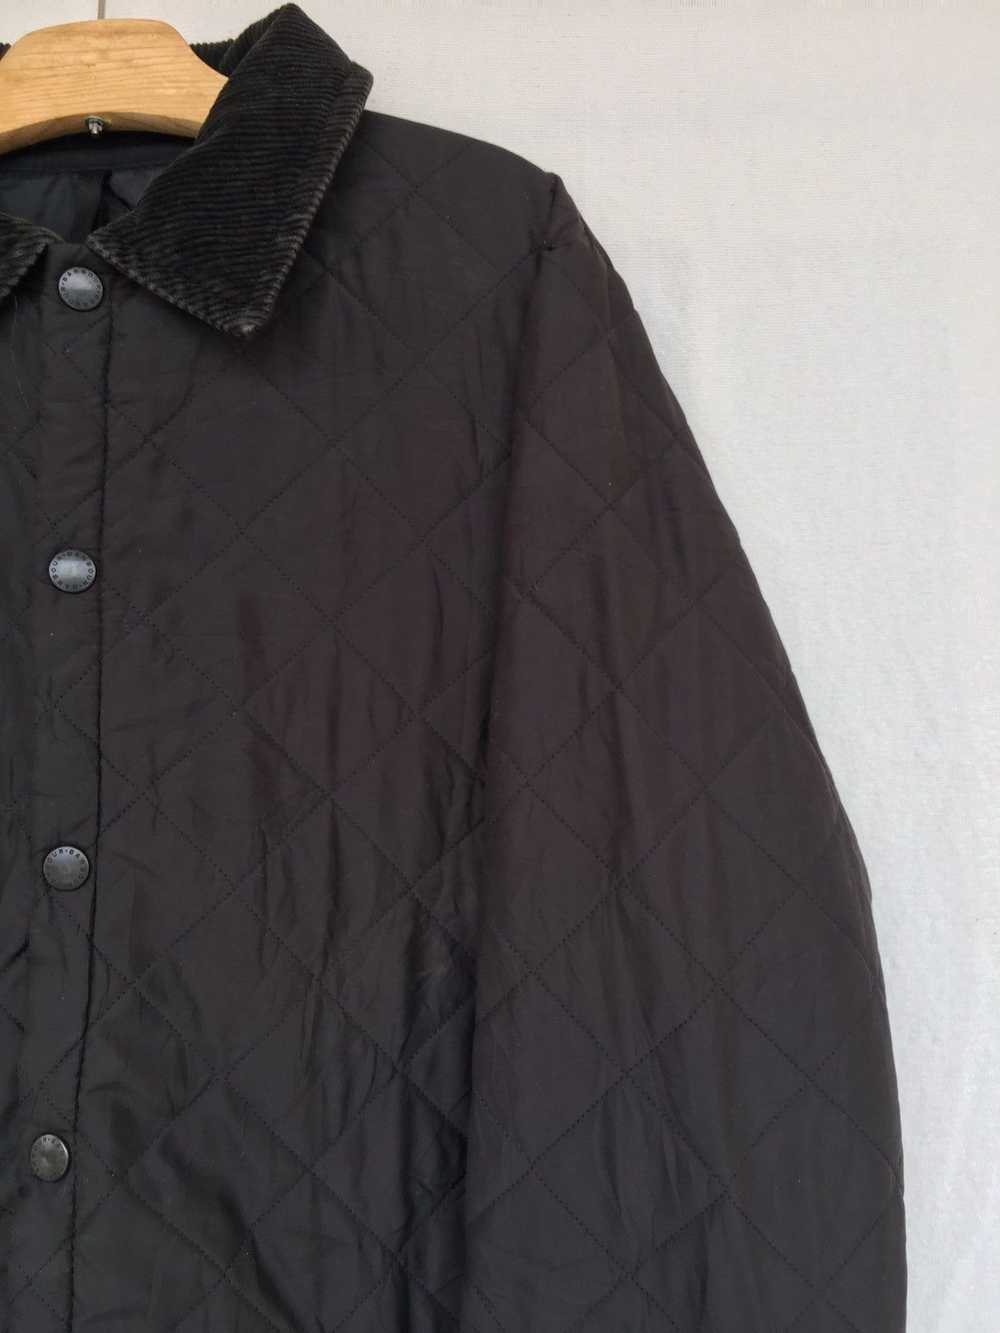 Barbour quilted jacket - image 3